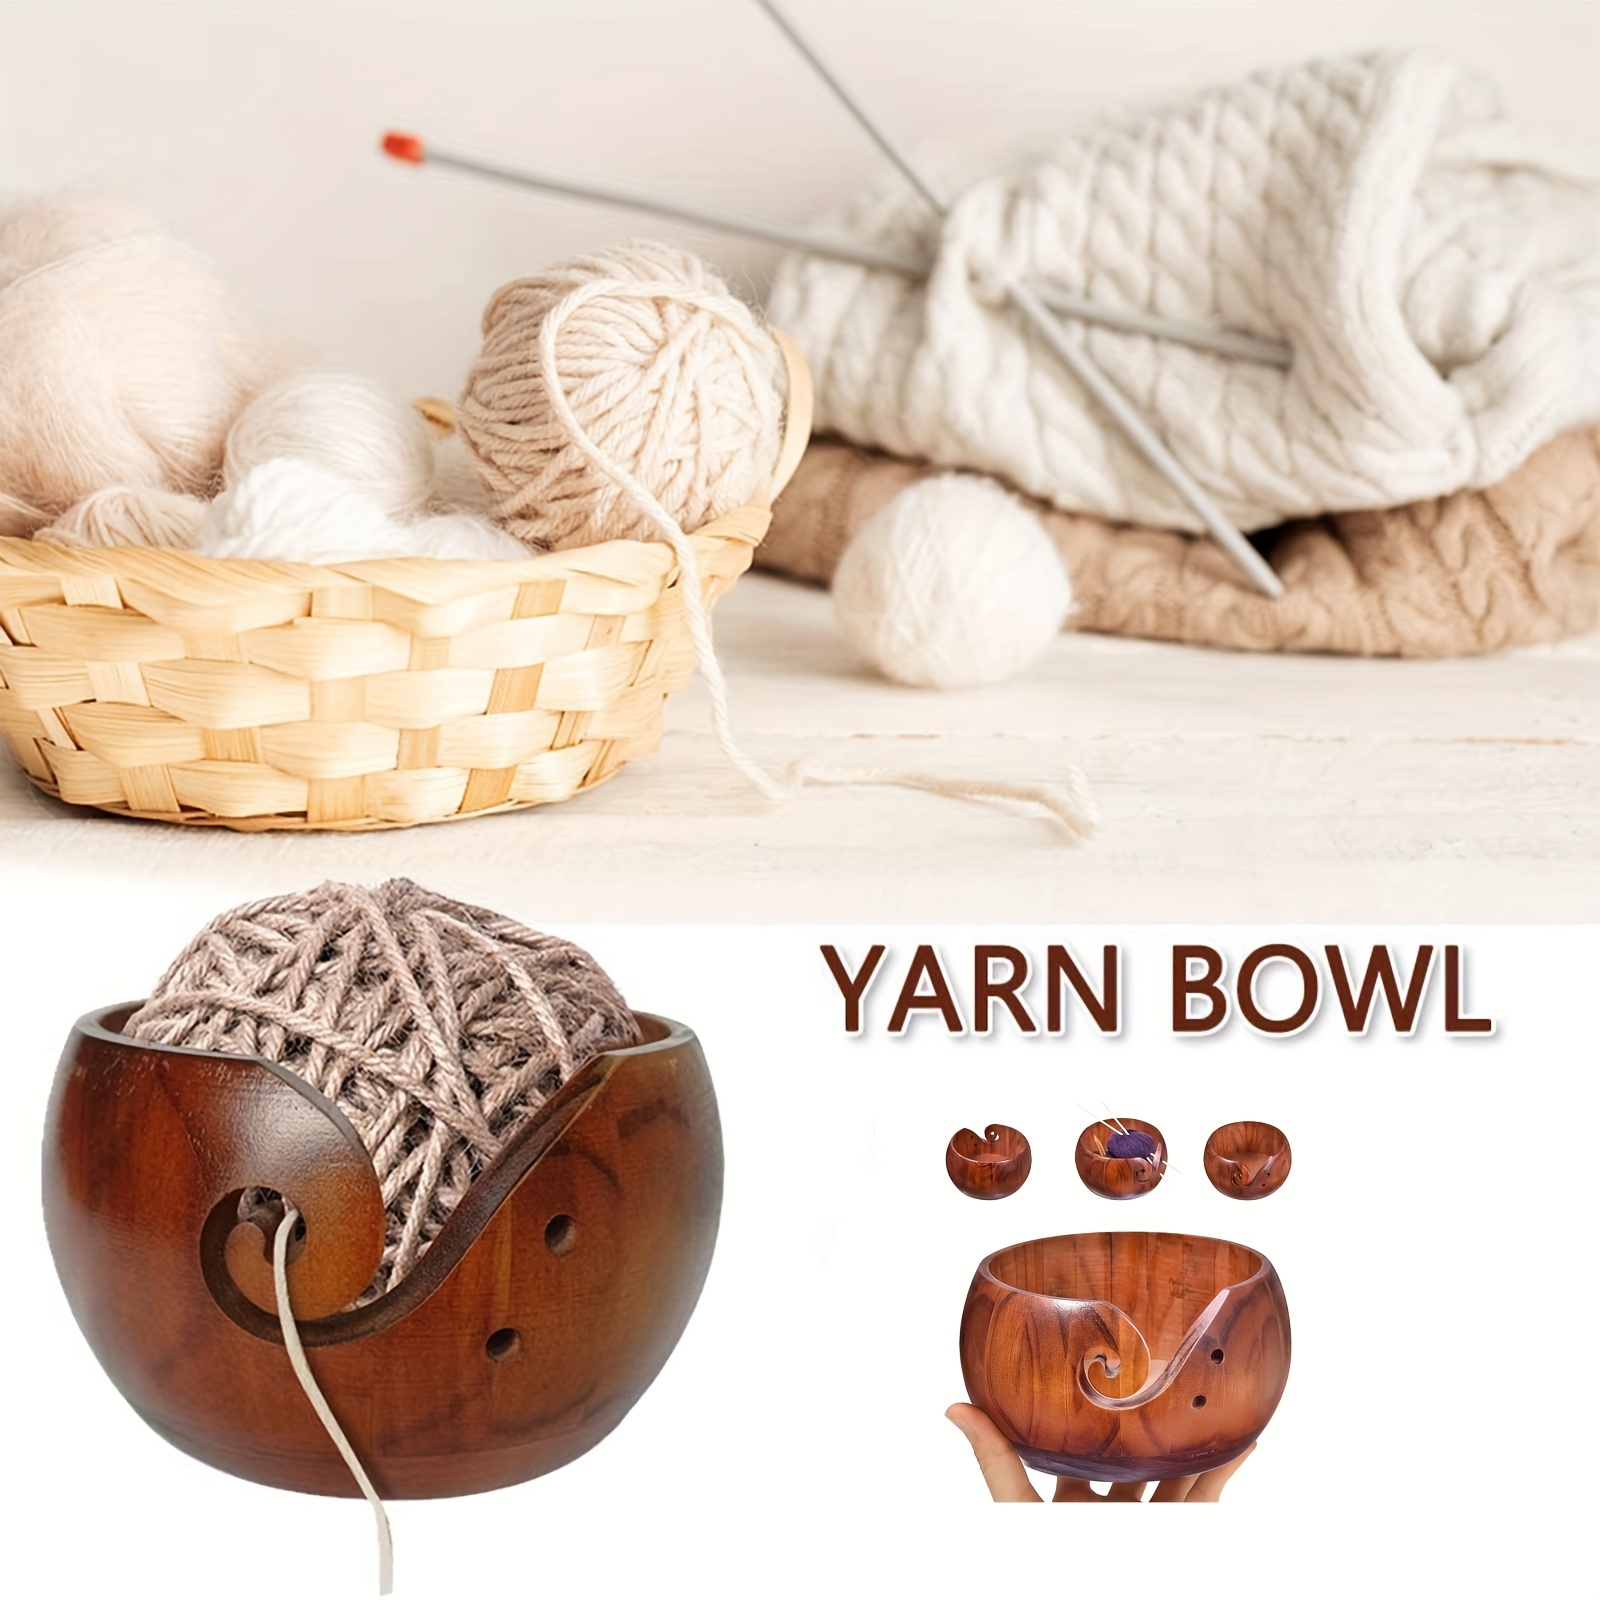  Wooden Yarn Bowl Yarn Storage Bowl with Removable Lid Home  Needlework Yarn Holder for Knitting and Crochet Accessories Kit